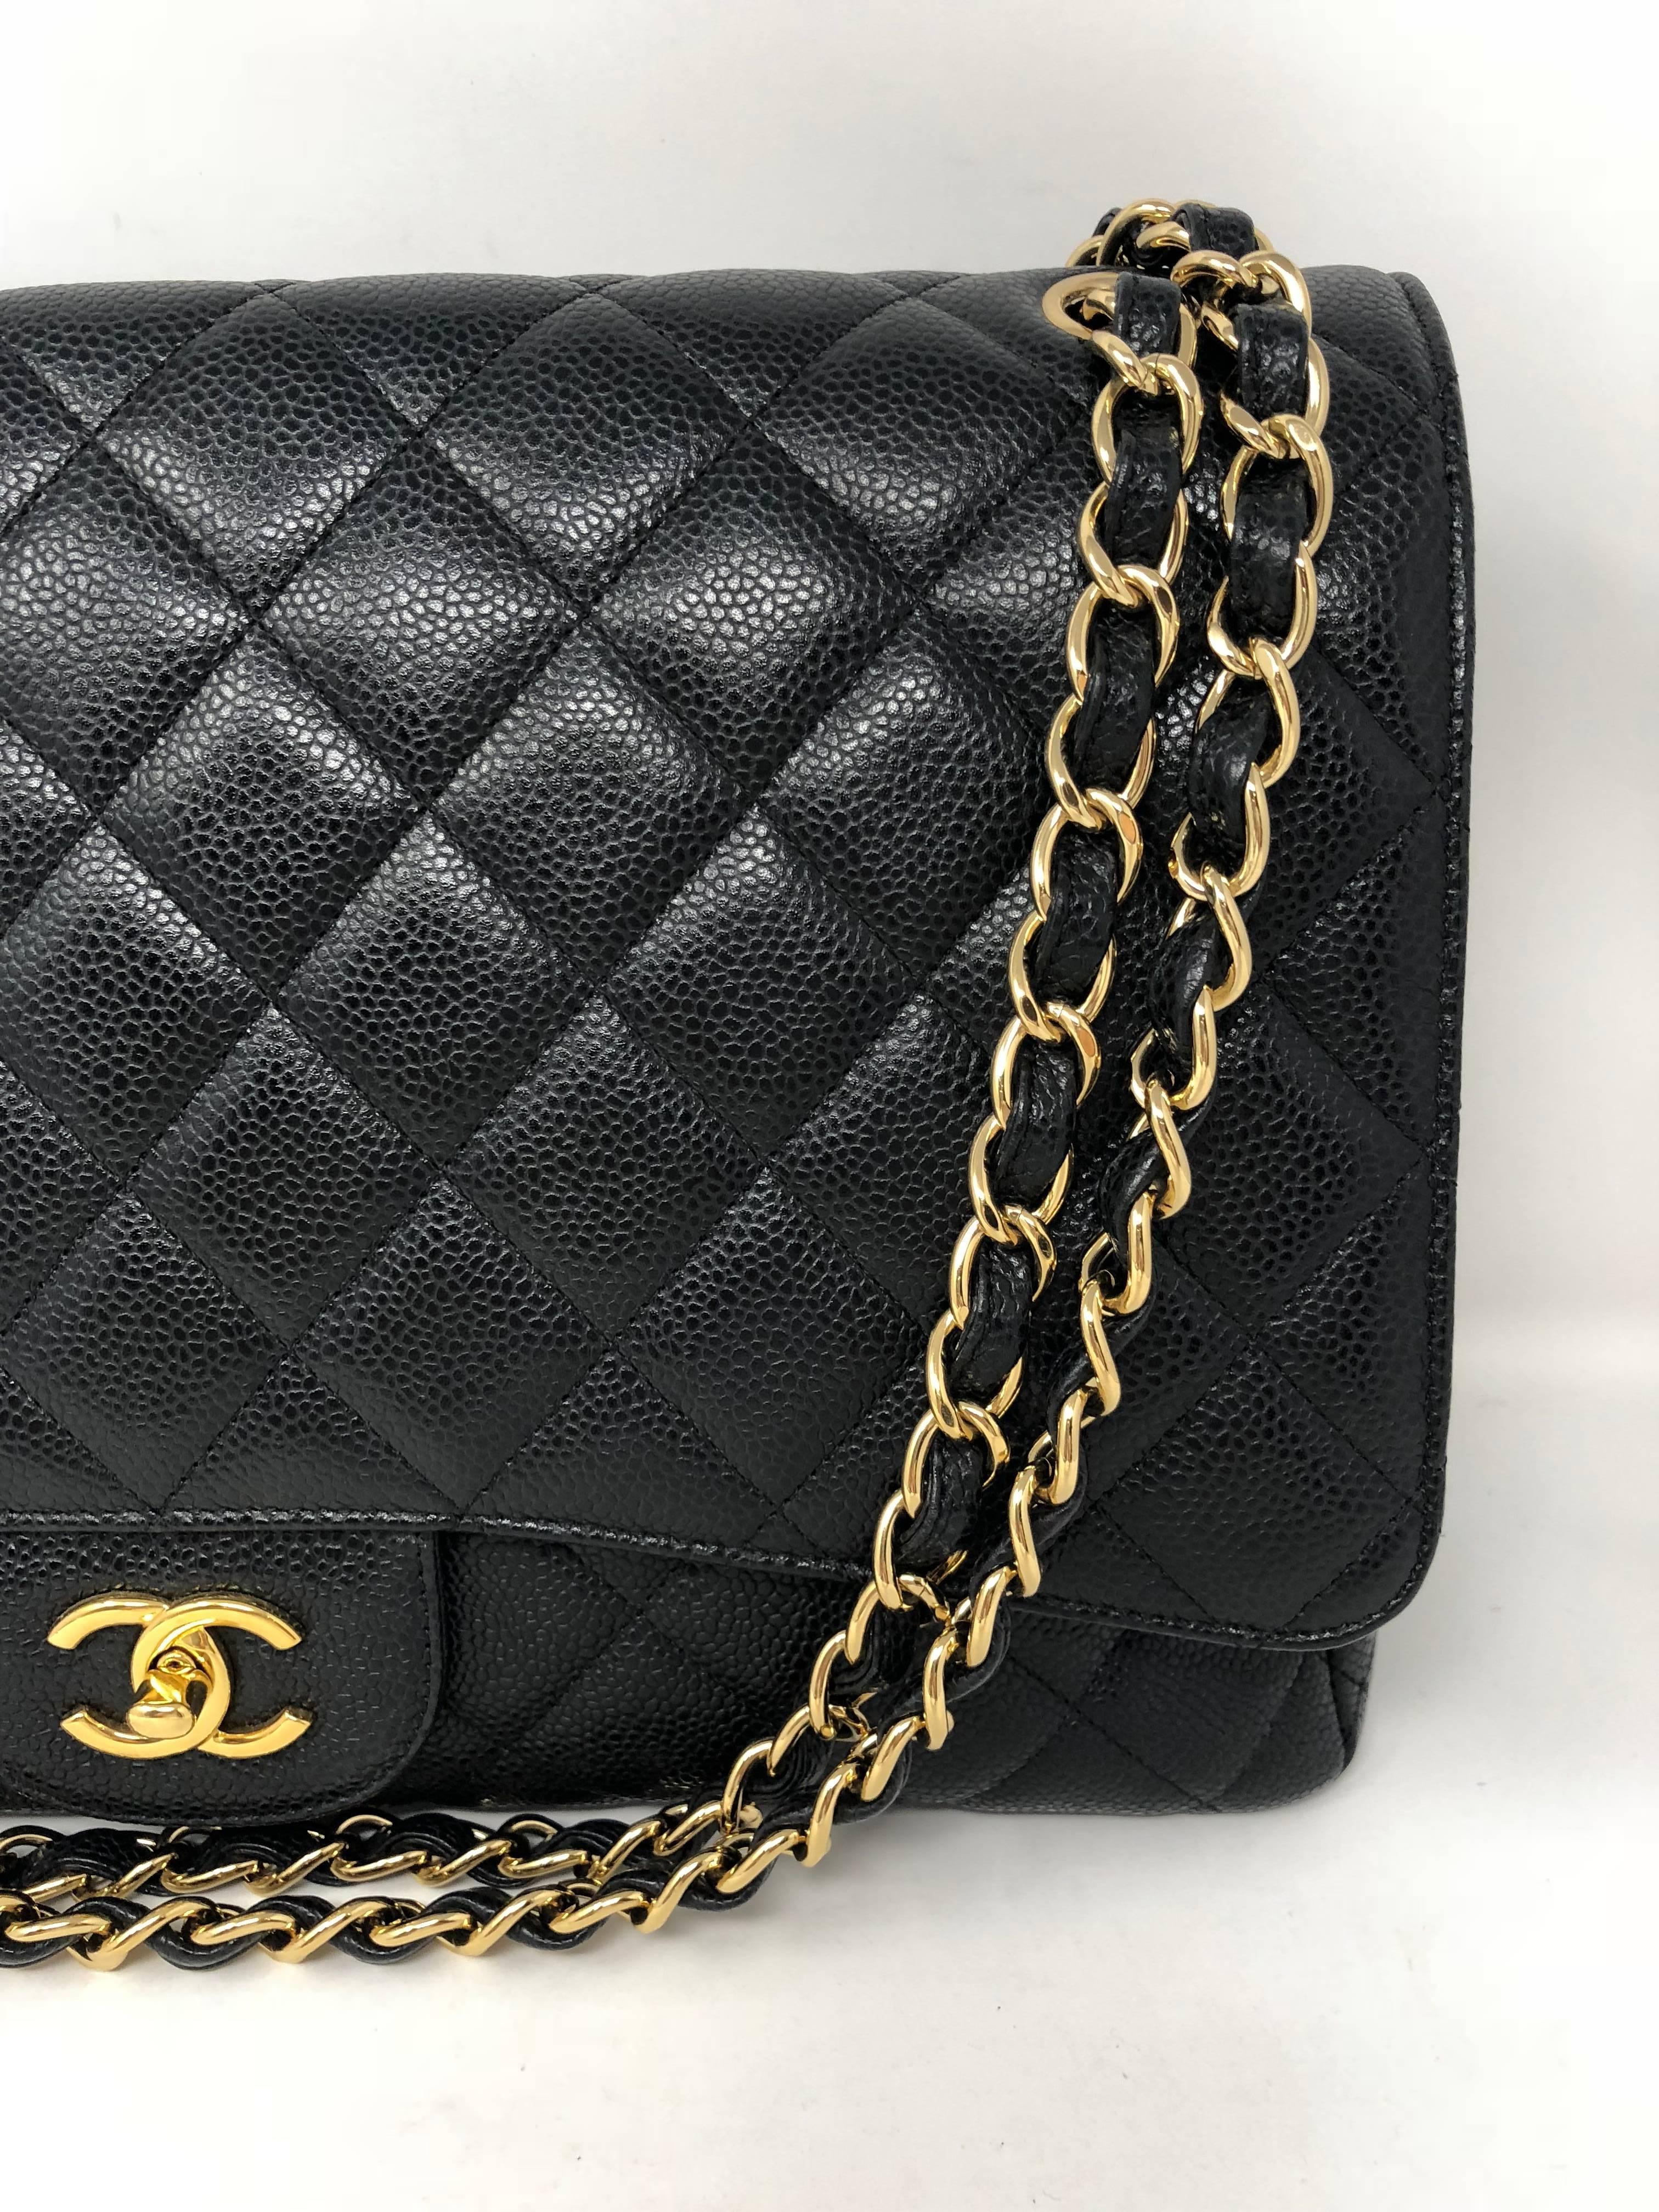 Chanel Black Caviar Leather Maxi Single Flap Bag with gold hardware. Mint condition wih slight wear. Bag can be worn doubled strap or as a crossbody. 